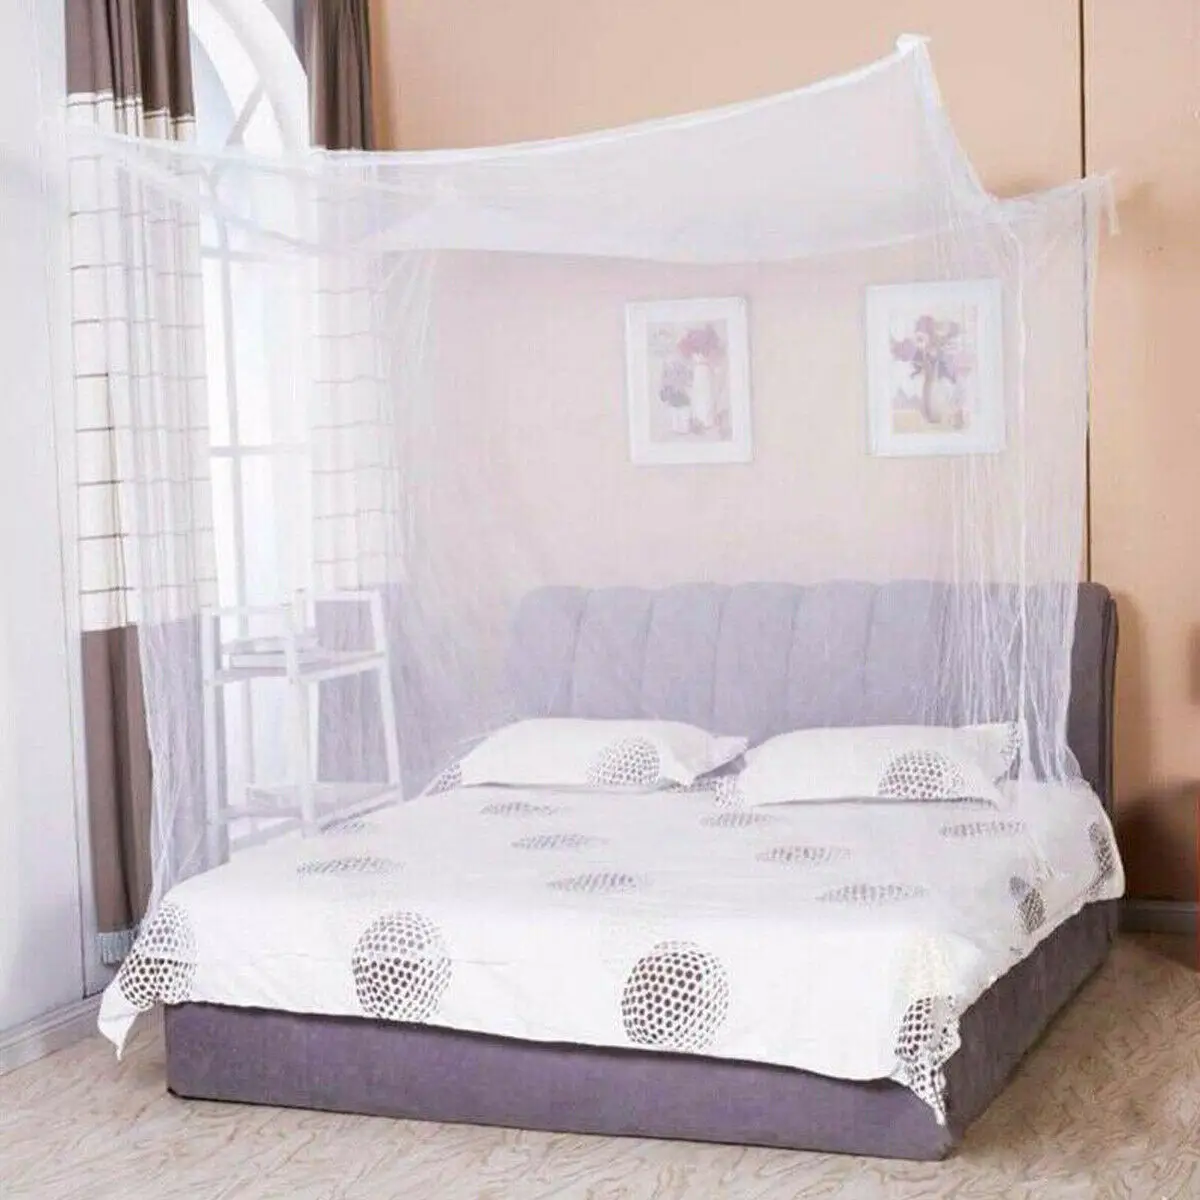 1pcs Bedding Netting Bed Mosquito Net 4 Corner Post Bed Student Fabric Canopy Net Queen King Twin Size For Double Bed